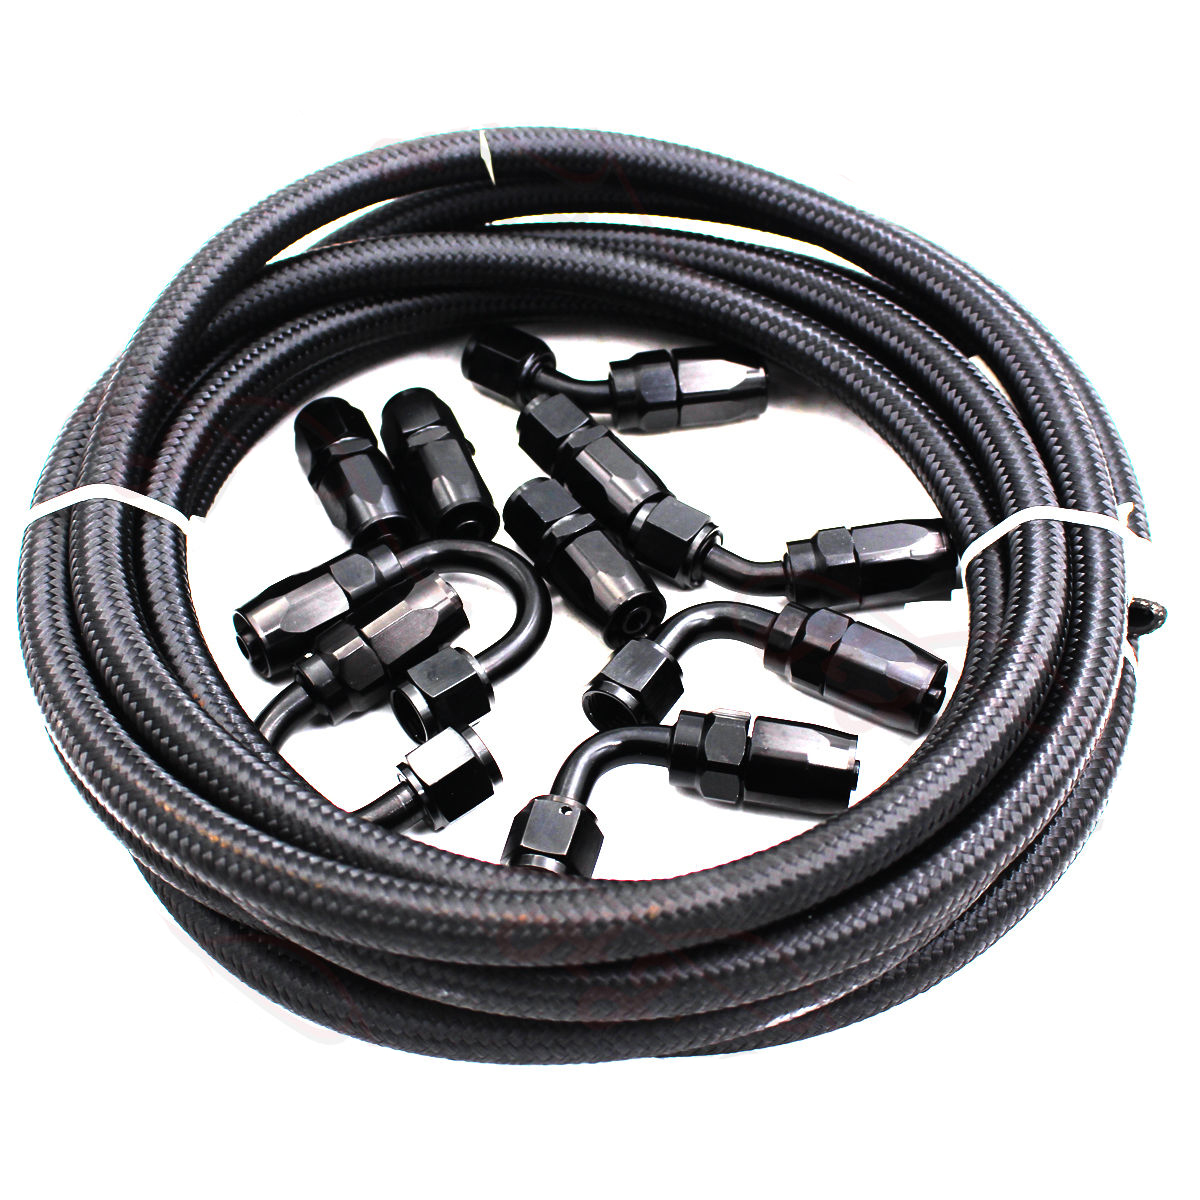 

5M AN8 Nylon Stainless Steel Braided Fuel 0°/45°/90°/180° Hose End Fuel Adapter Kit Oil